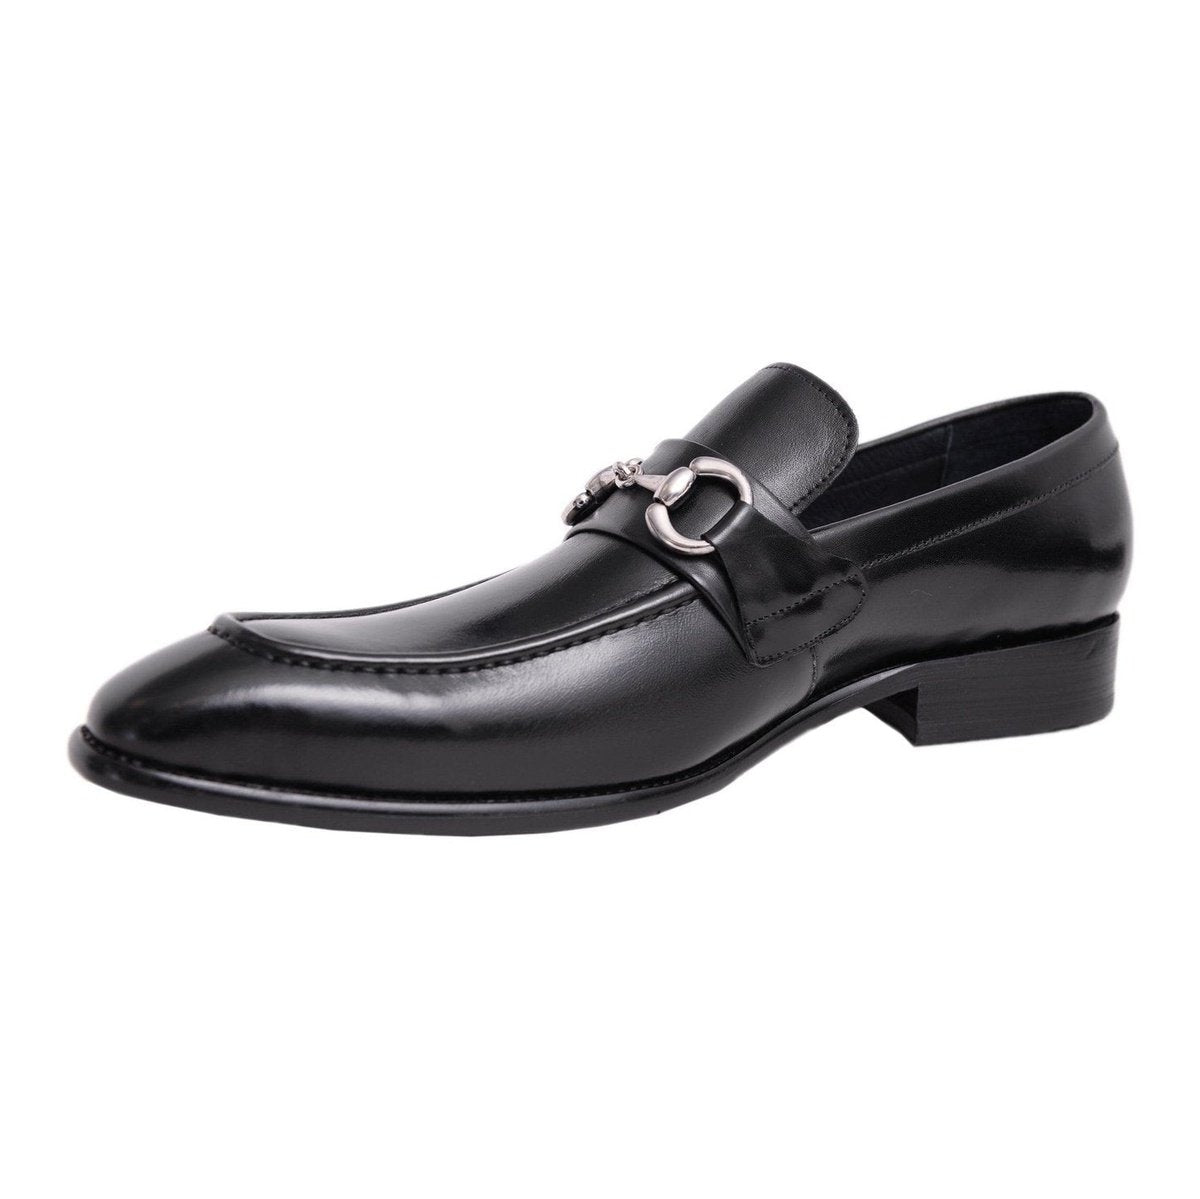 Carrucci Shoes For Amazon Carrucci Black Slip-on Loafer Apron Toe Leather Dress Shoes Decorative Buckle